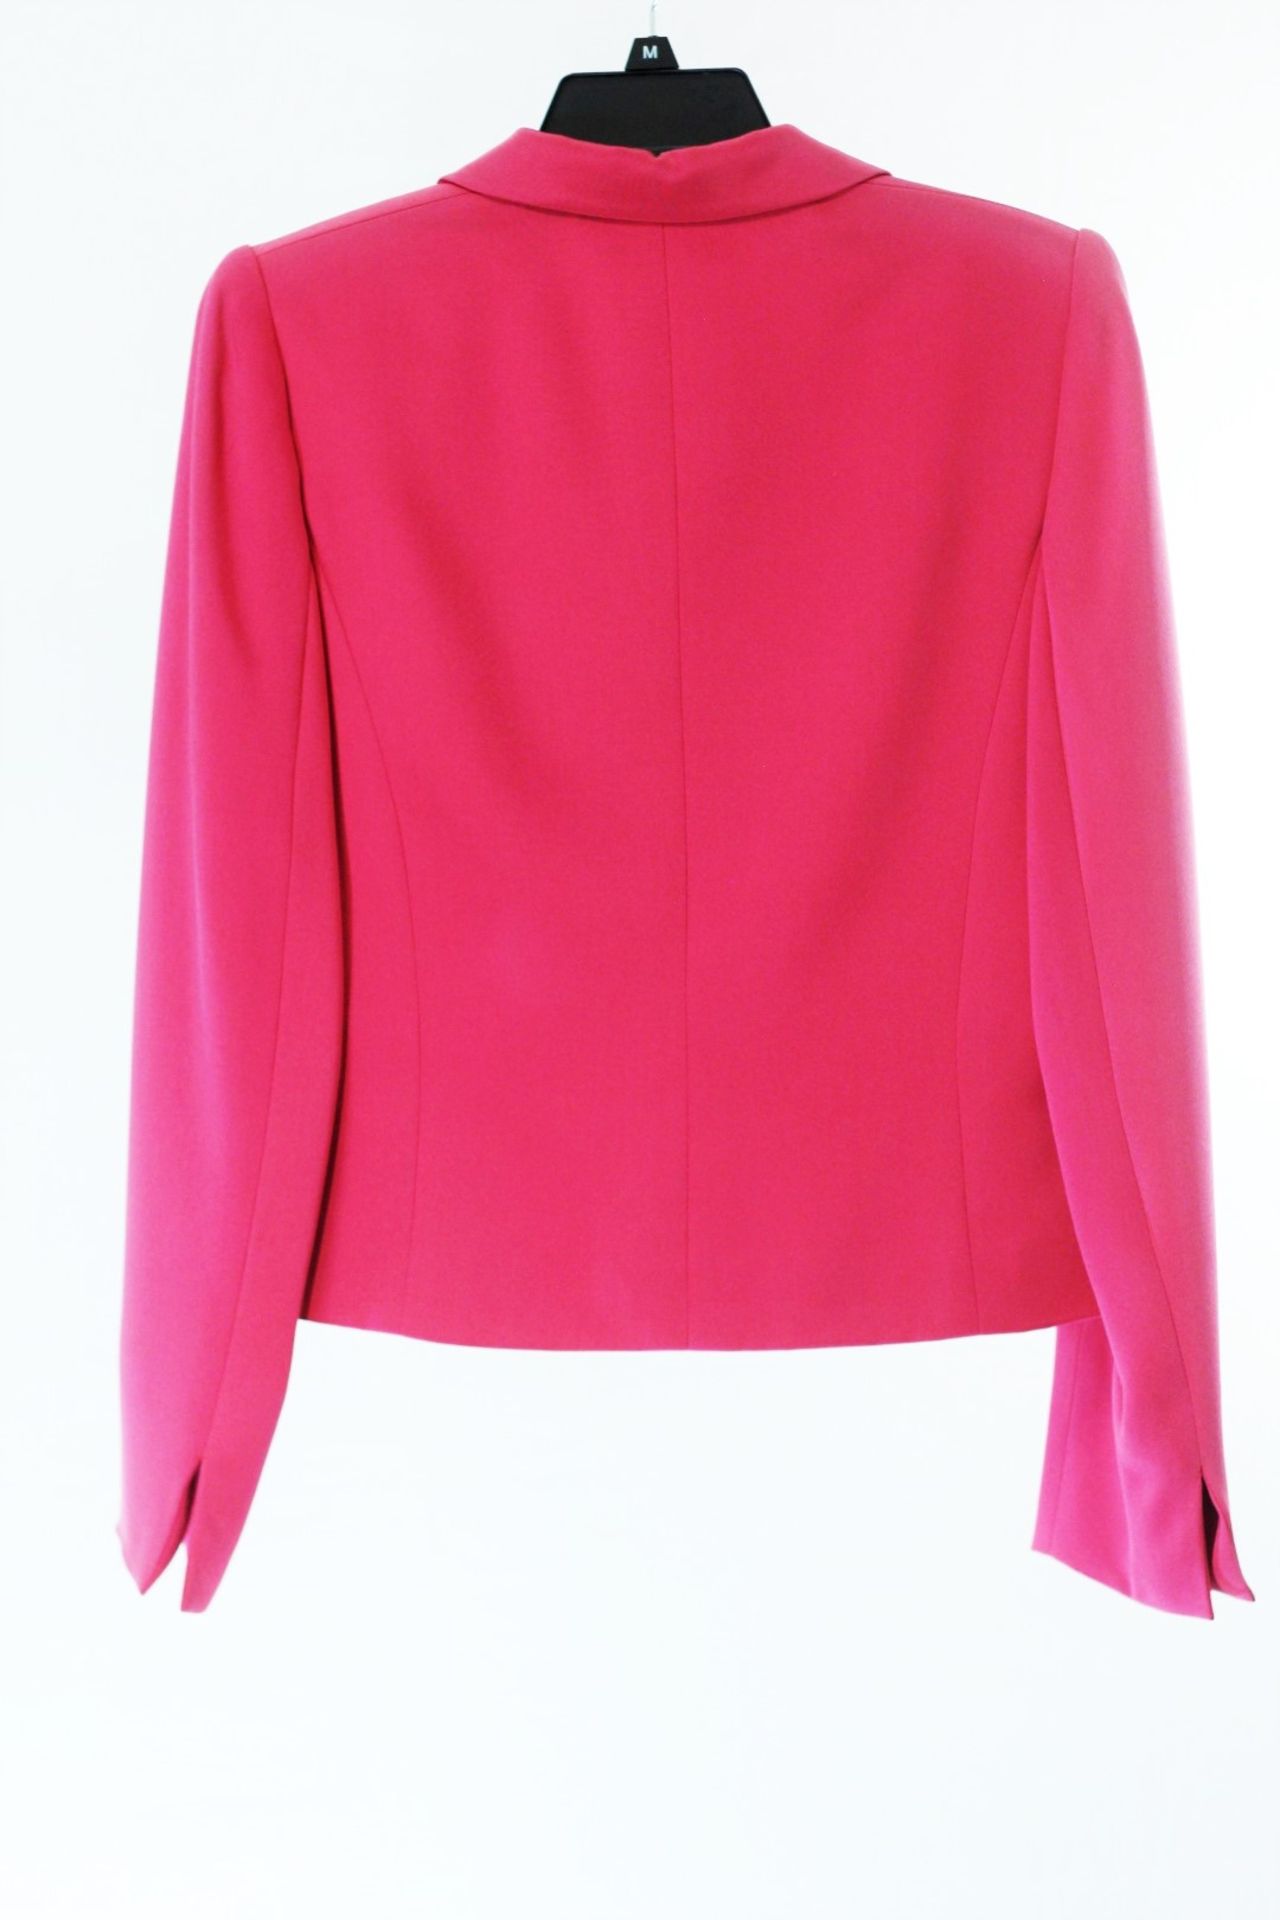 1 x Anne Belin Fuscia Jacket - Size: 18 - Material: 100% Silk - From a High End Clothing Boutique In - Image 4 of 9